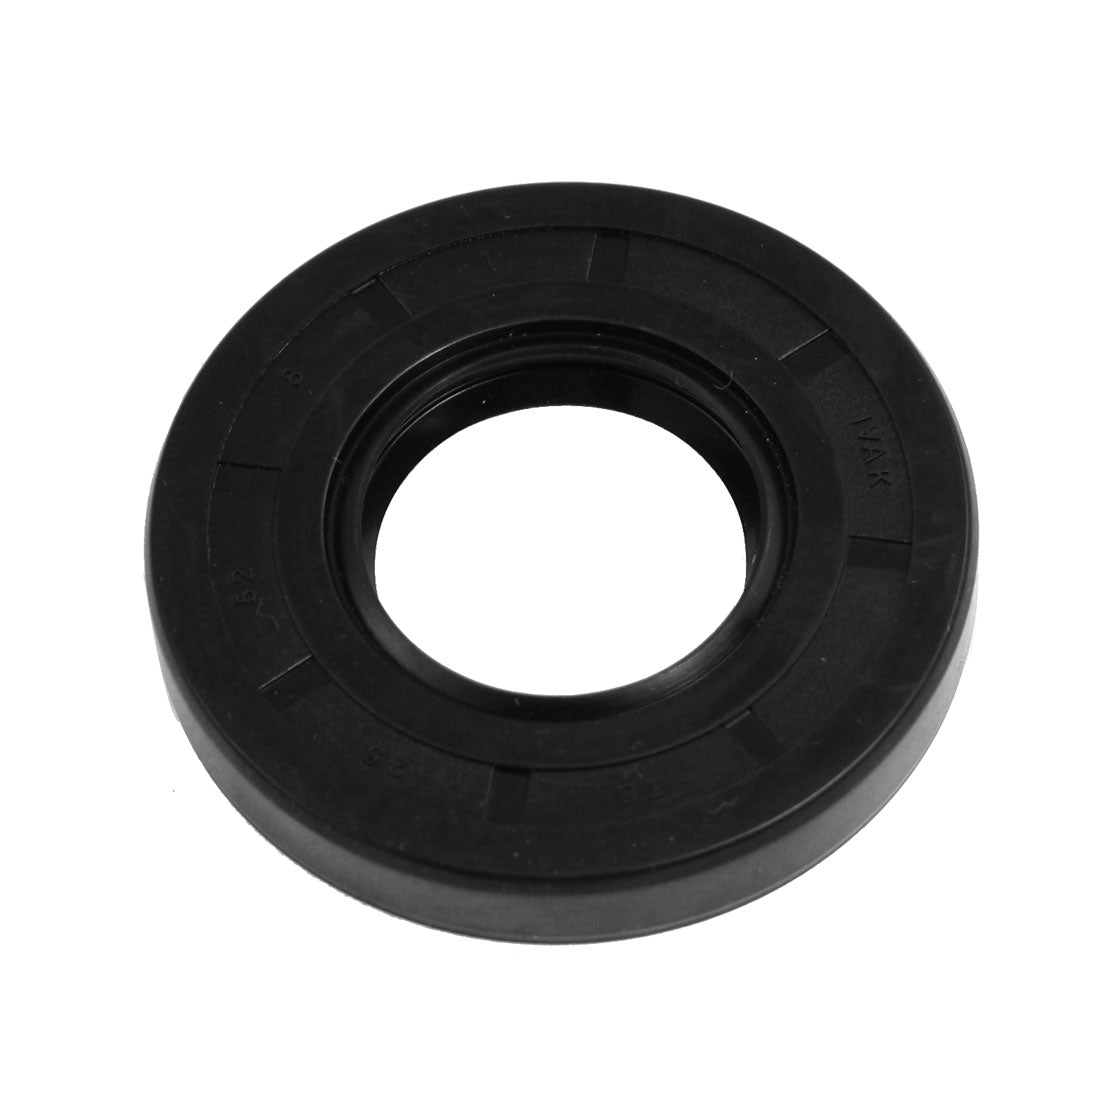 uxcell Uxcell Black Nitrile Rubber Double Lip Oil Shaft Seal TC 25mm x 52mm x 8mm